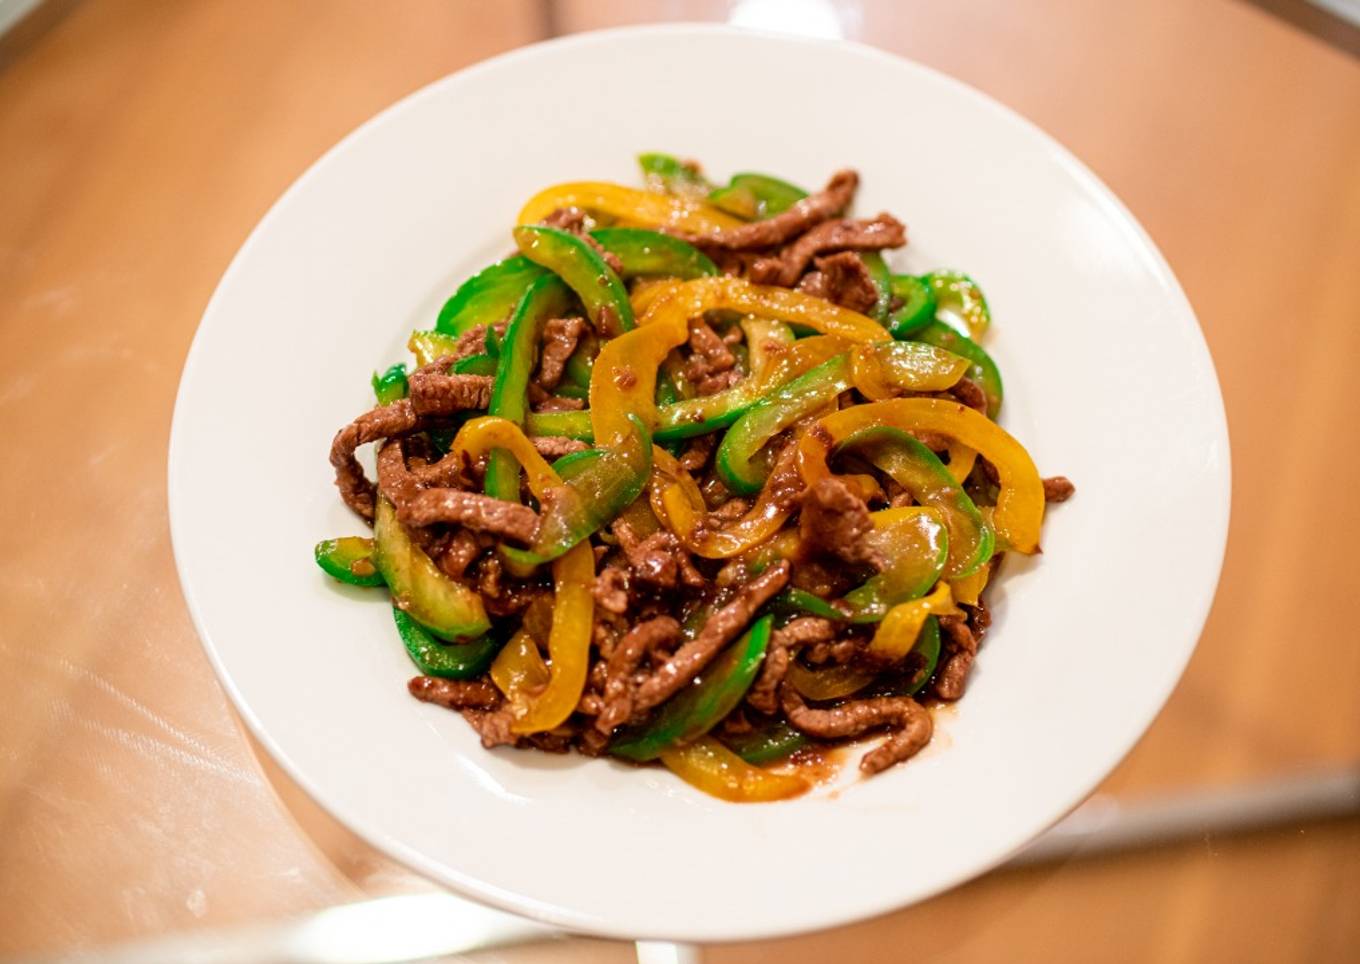 Stir-fried beef and paprika with oyster sauce